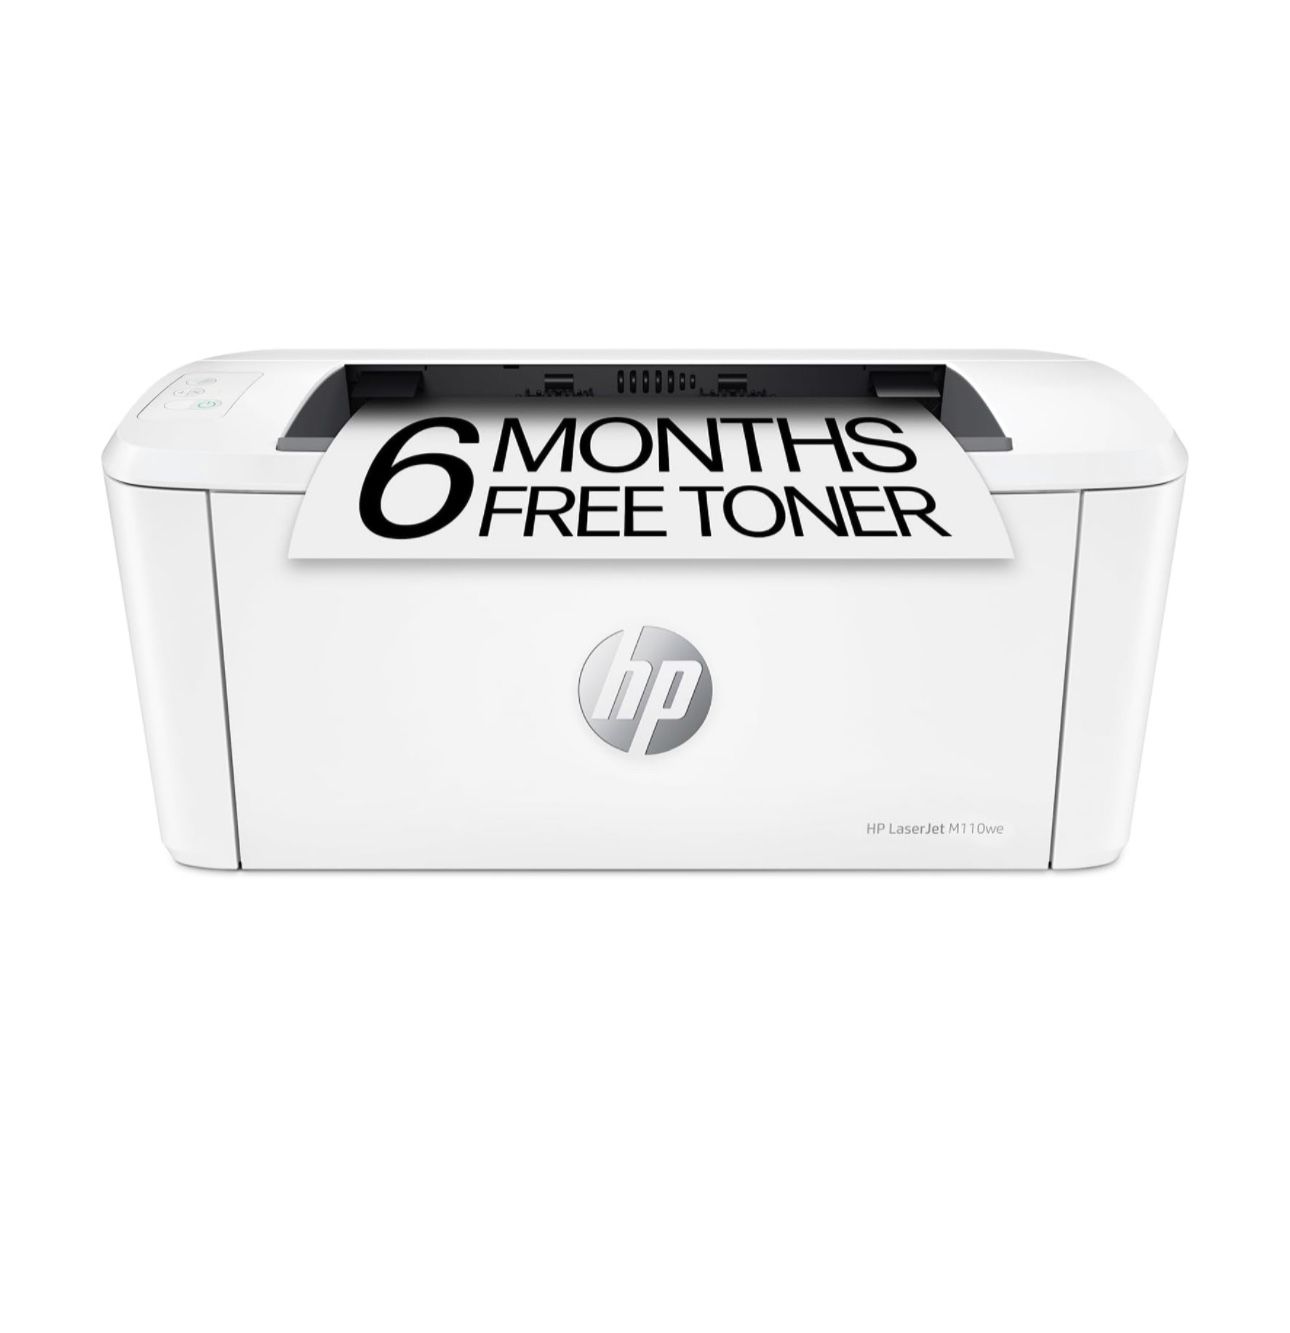 HP LaserJet M110we Wireless Black and White Printer with HP+ for Sale in  Cuyahoga Falls, OH - OfferUp